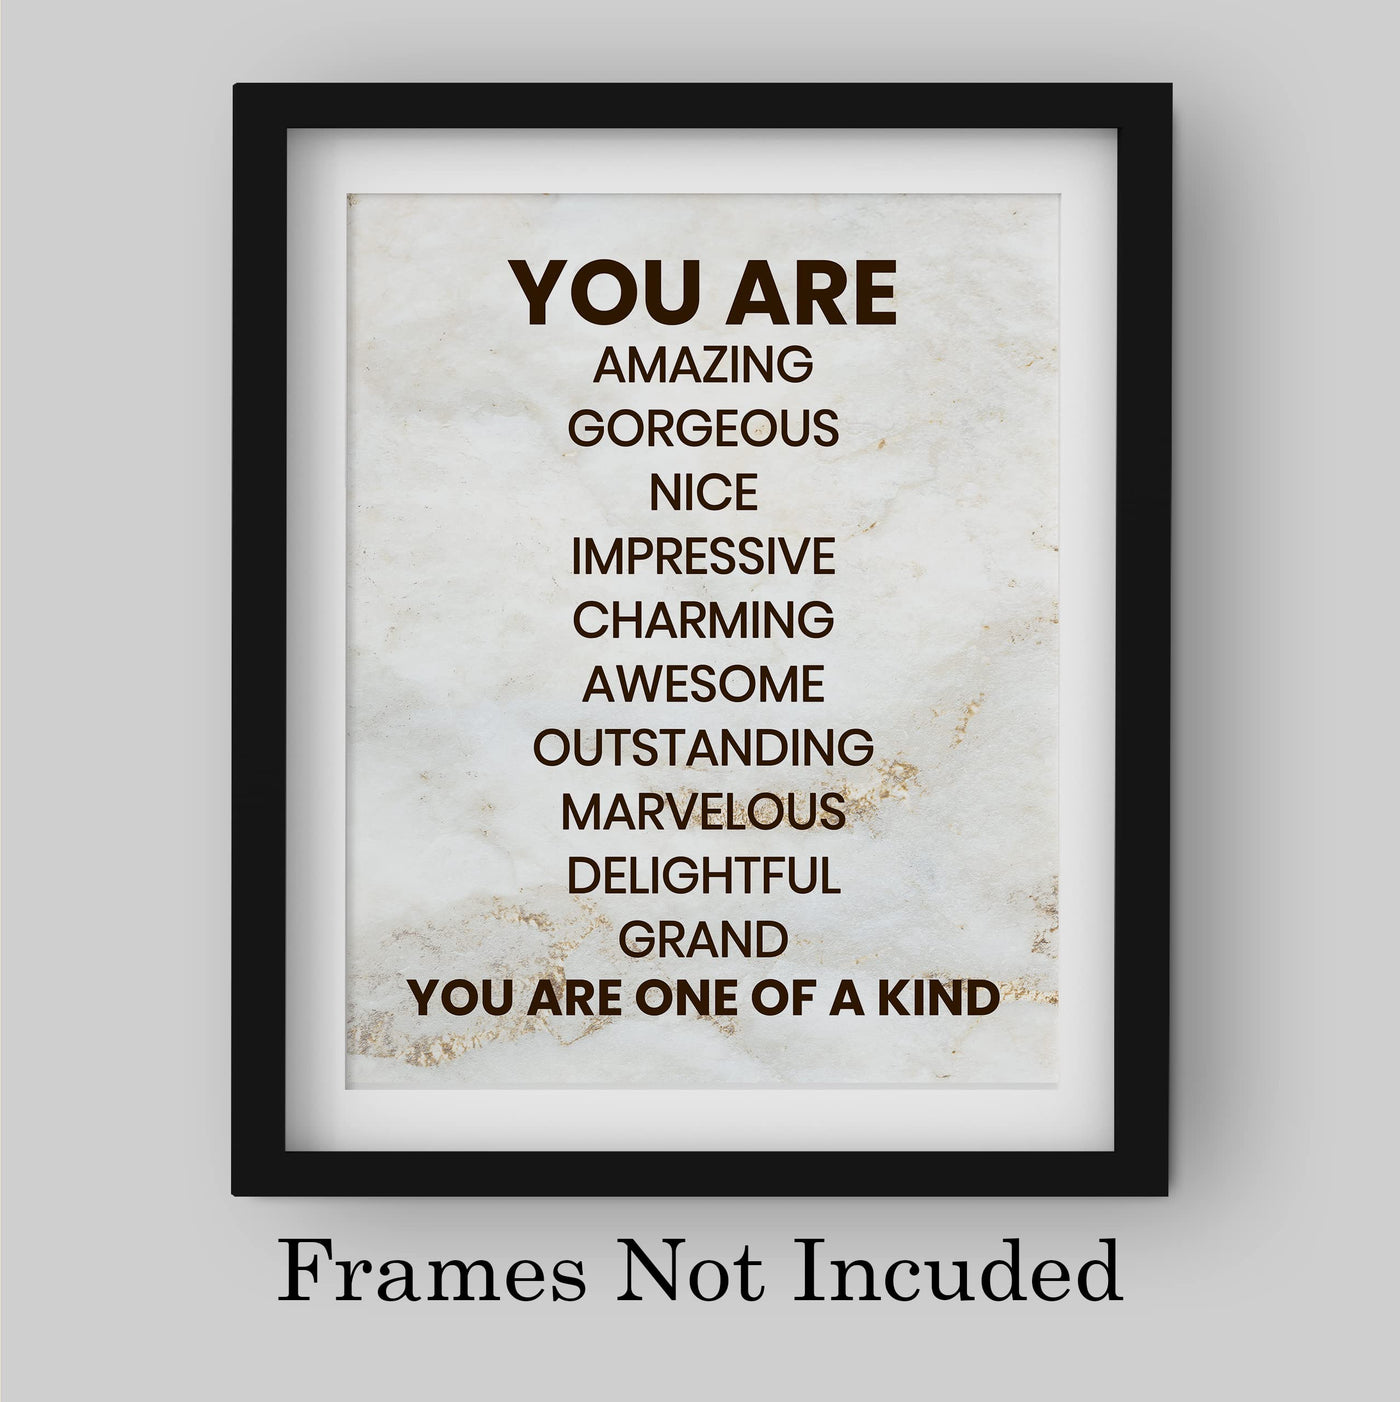 You Are One of a Kind- Inspirational Wall Art Print- 8 x 10" Ready to Frame. Motivational Wall Art-Home Decor- Office Decor. Perfect For Building Confidence in Children, Friends & Graduates!